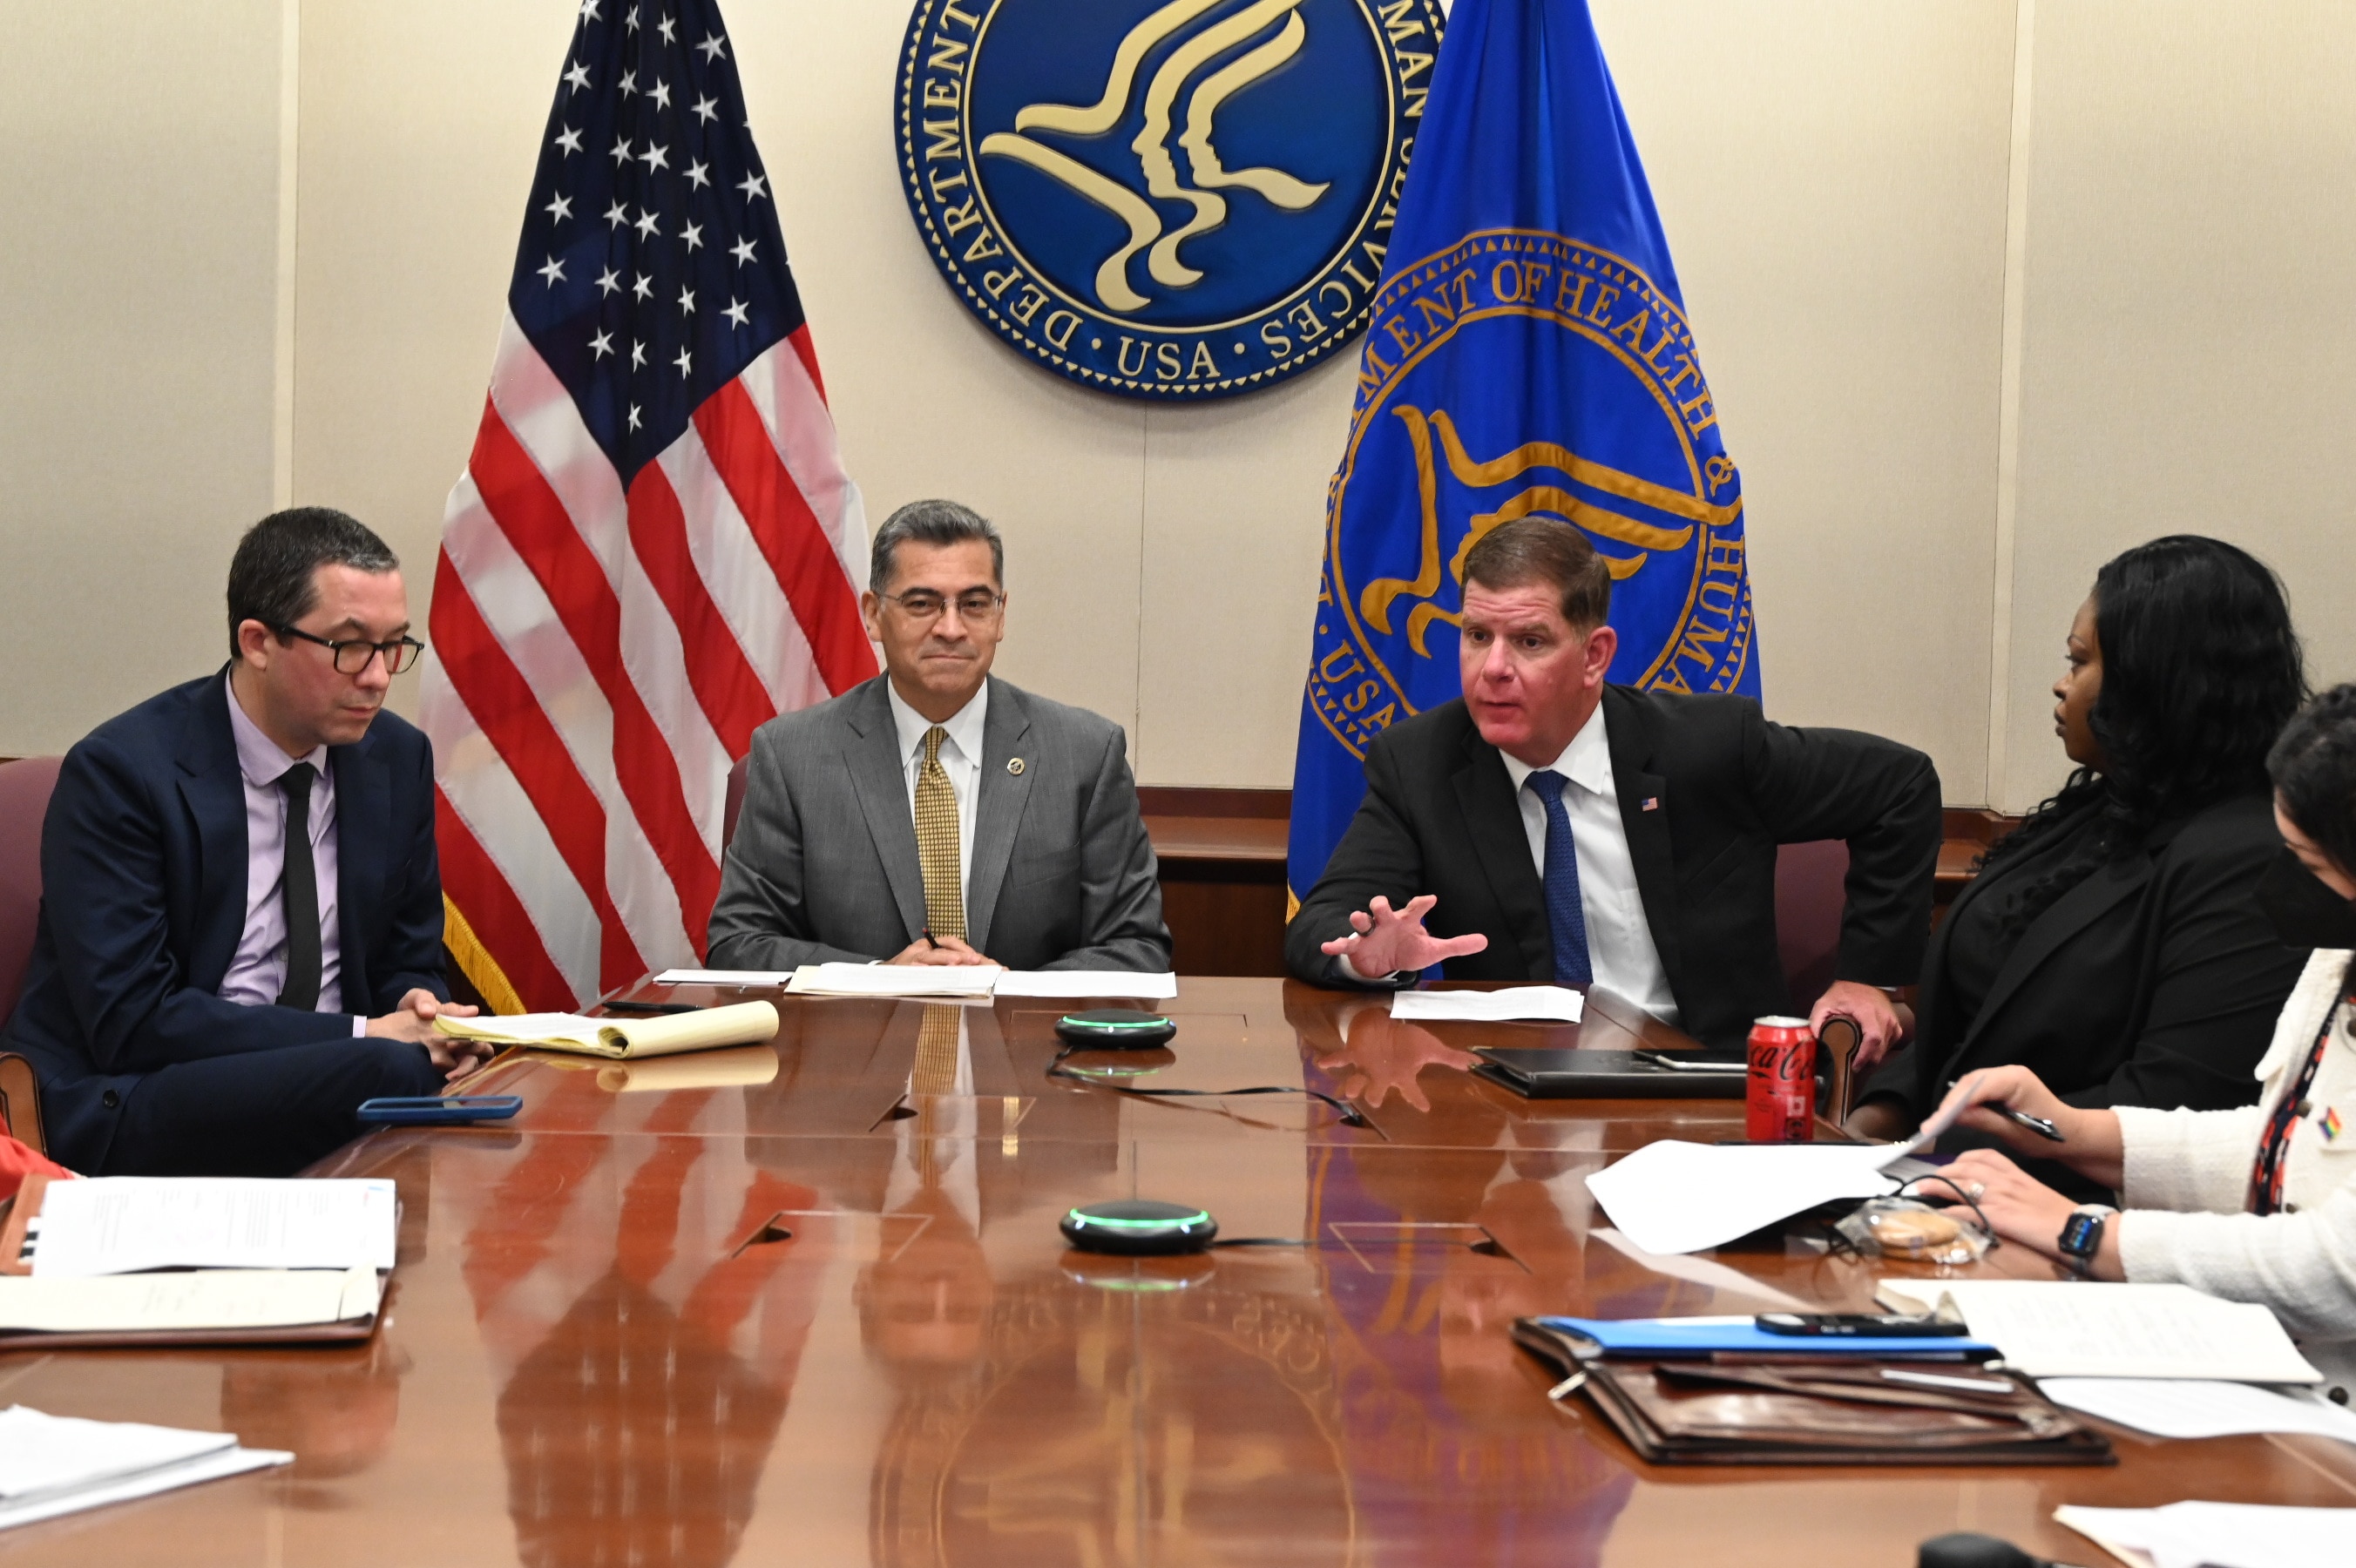 Secretary Becerra and Secretary Walsh seated with others at a large conference table during a meeting with health insurers to discuss birth control coverage